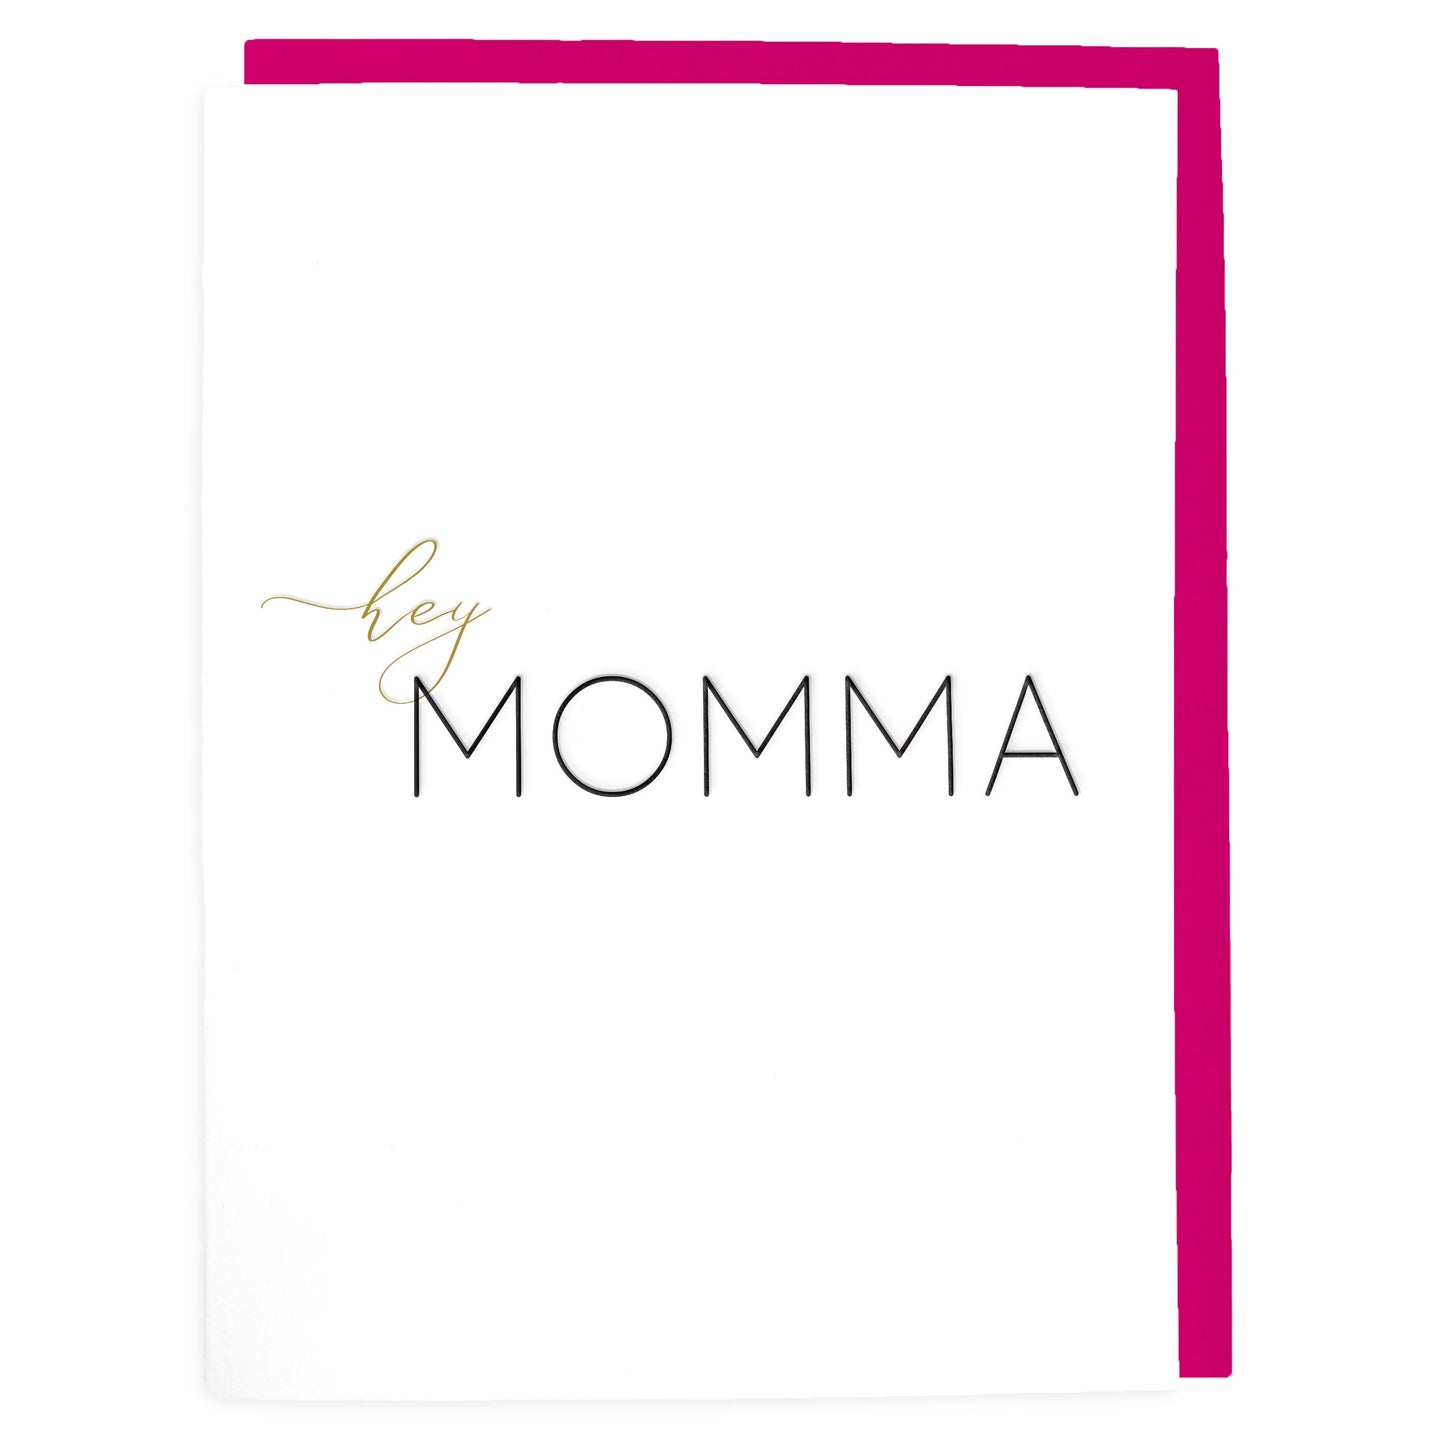 Hey Momma Card - Letterpress Greeting Card - Tea and Becky